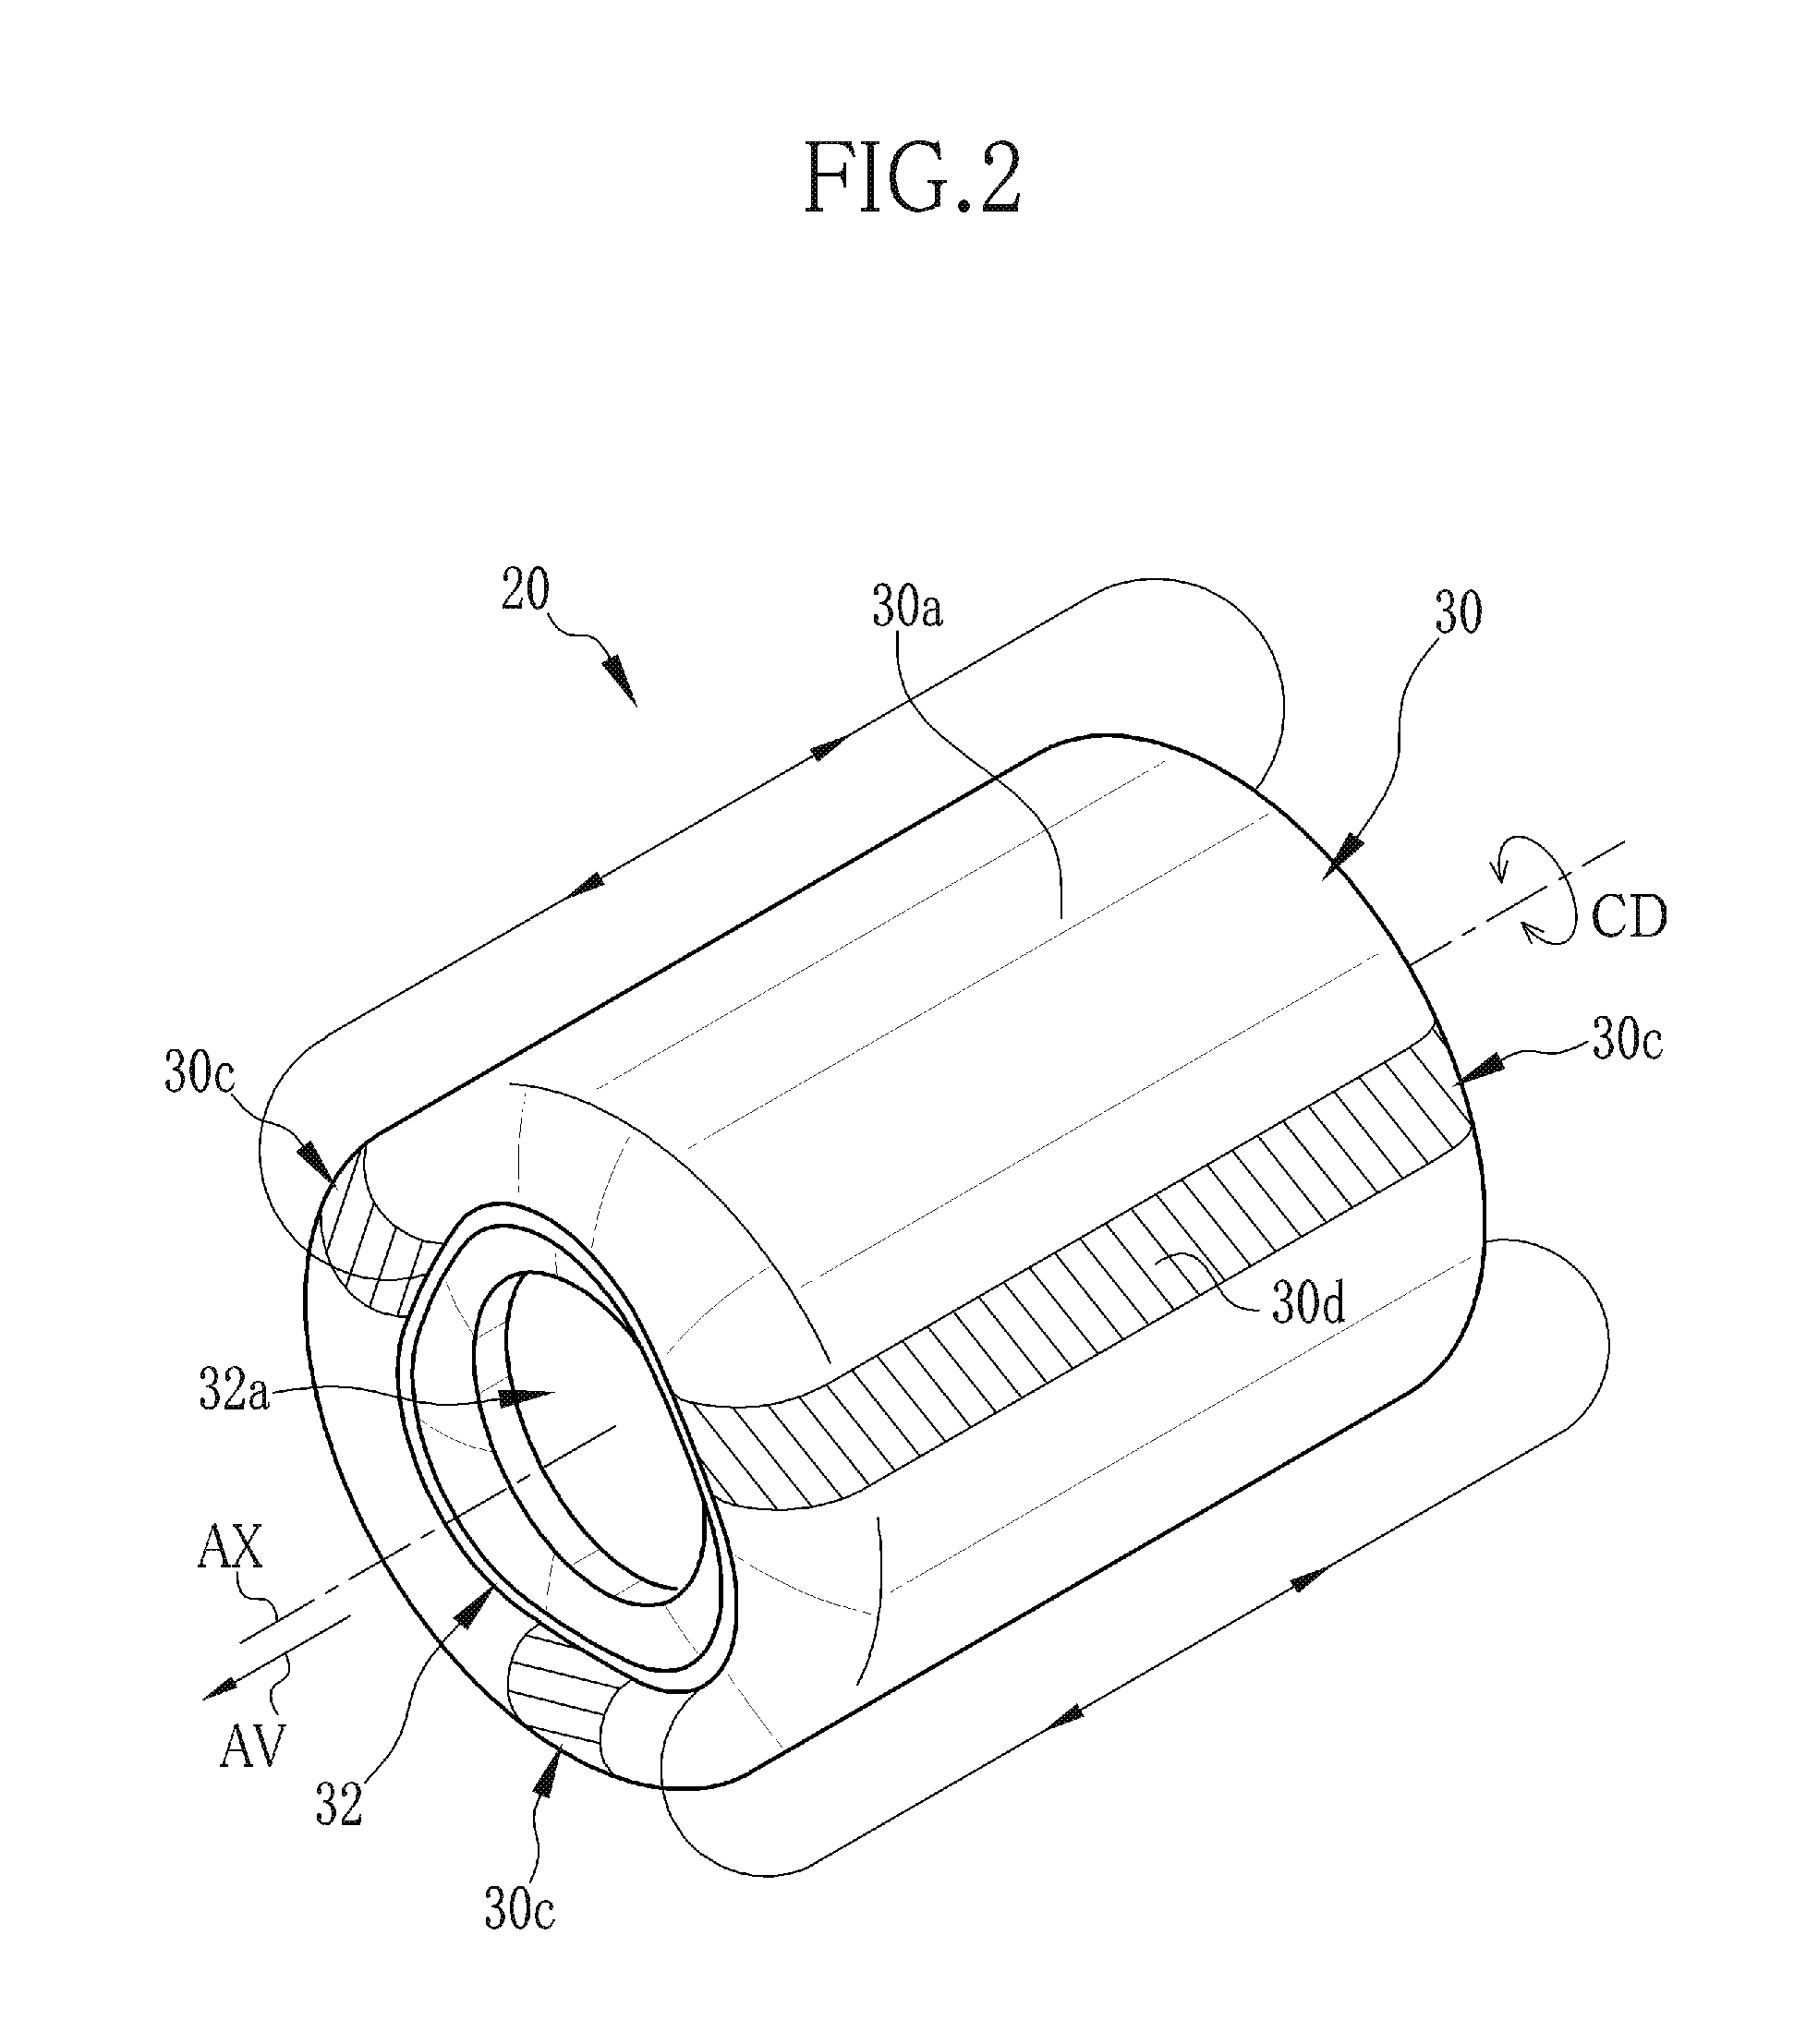 Endoscope insertion assisting device